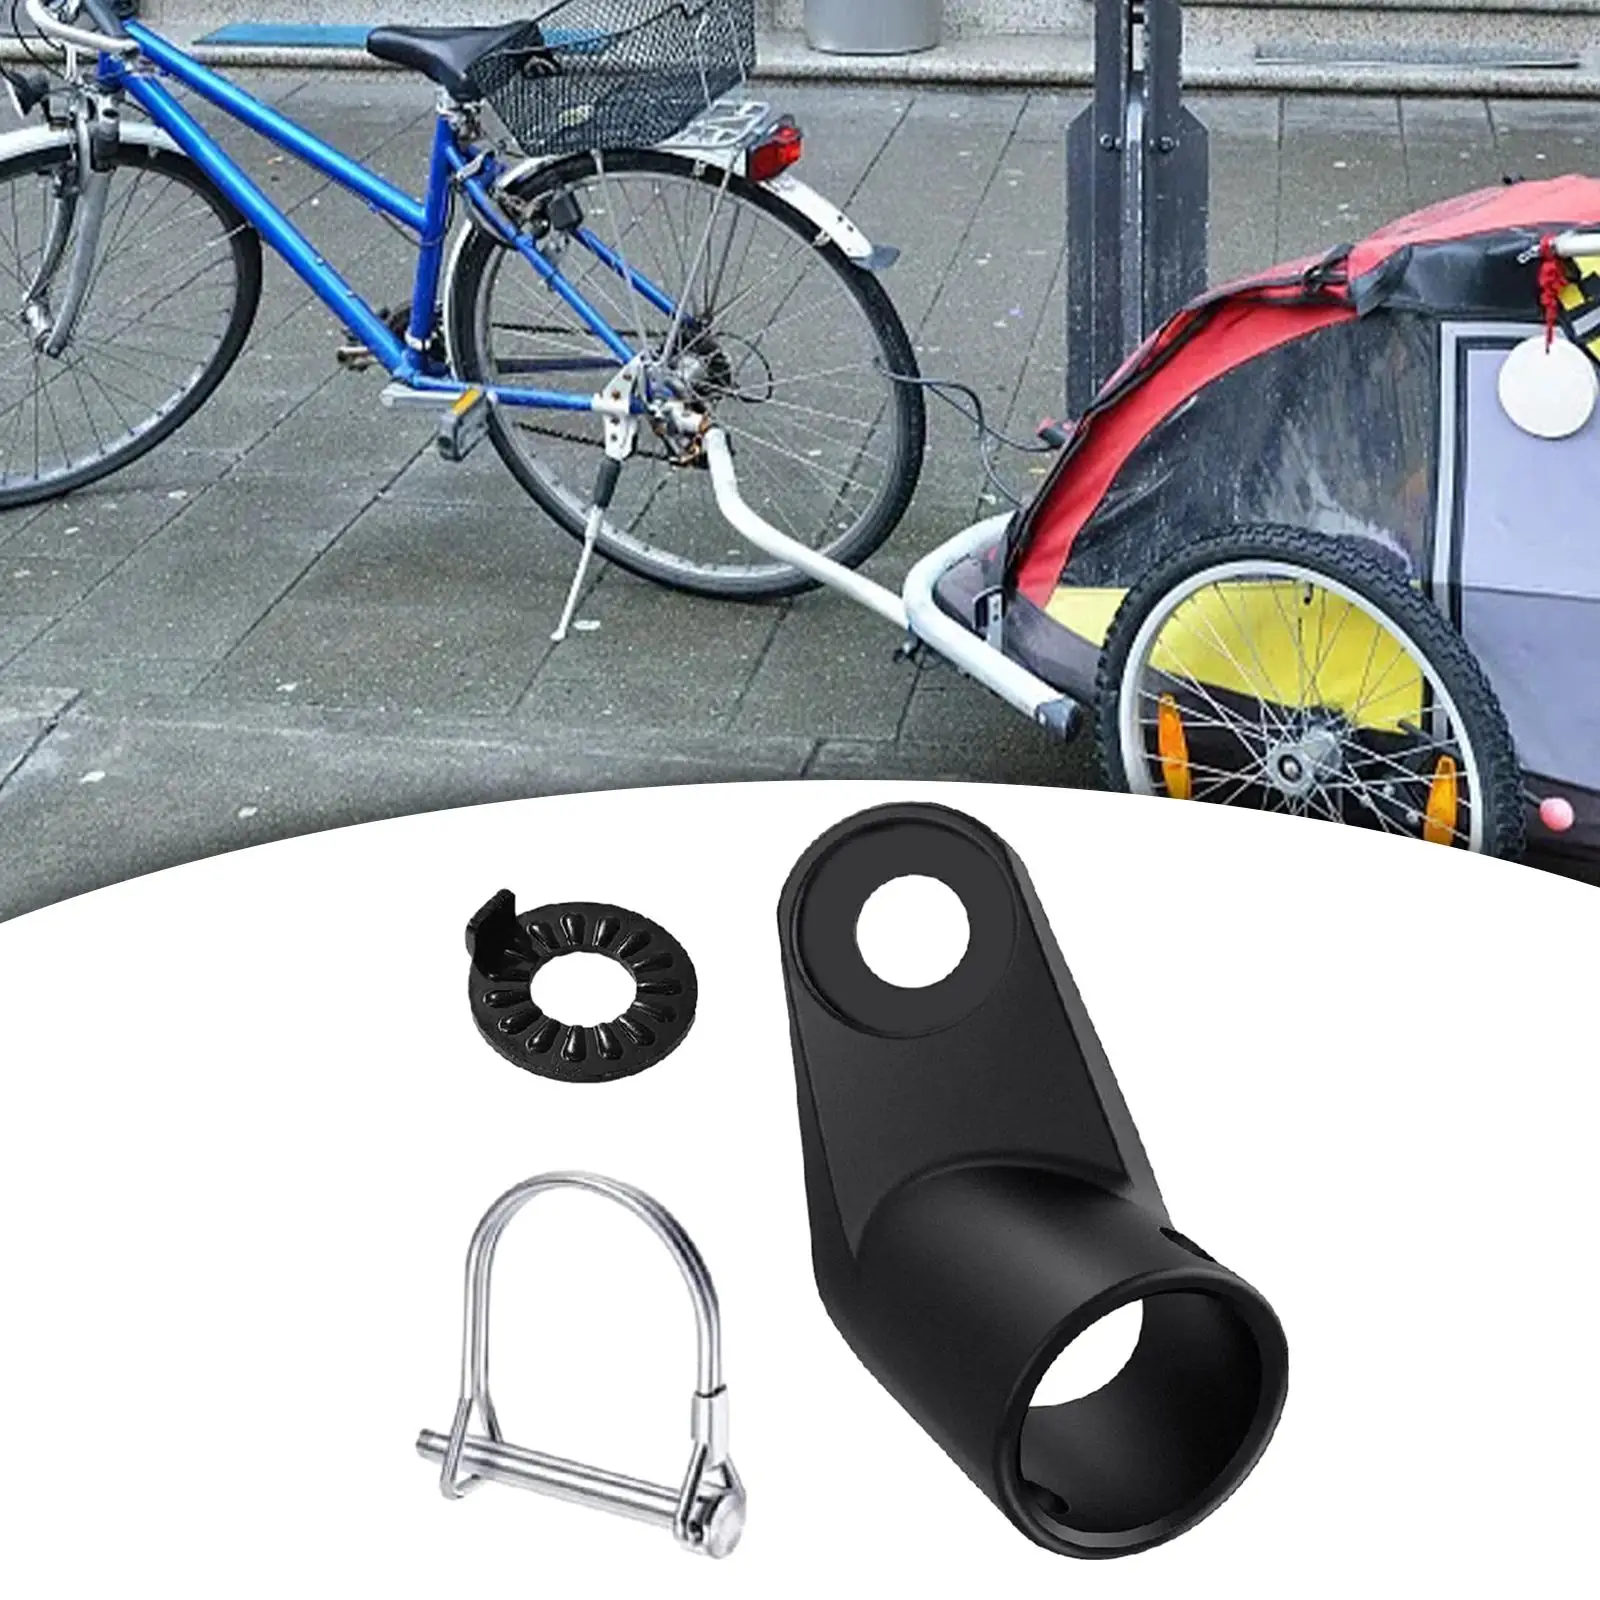 Bike Trailer Hitch Angled Elbow Metal Replacement Bike Trailer Attachment Cycling Equipment for Kids Bikes Pets Trailers